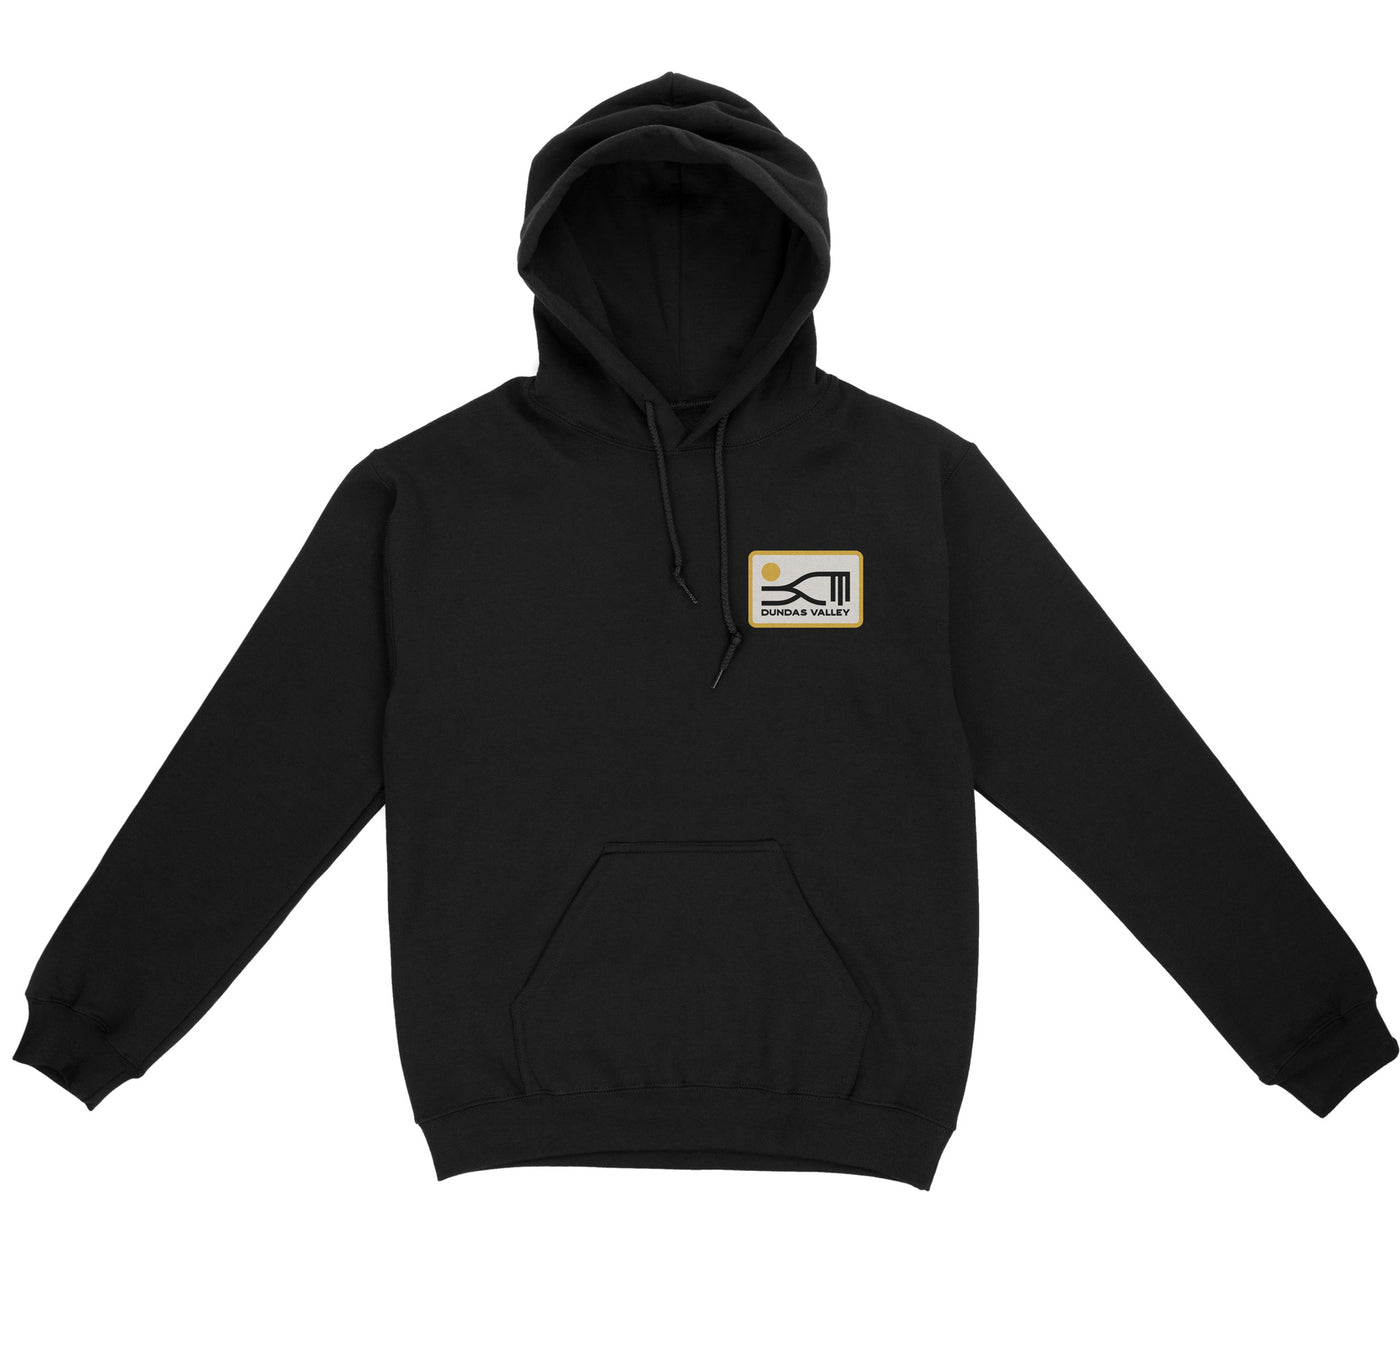 Dundas Valley Linescape 2 Hoodie